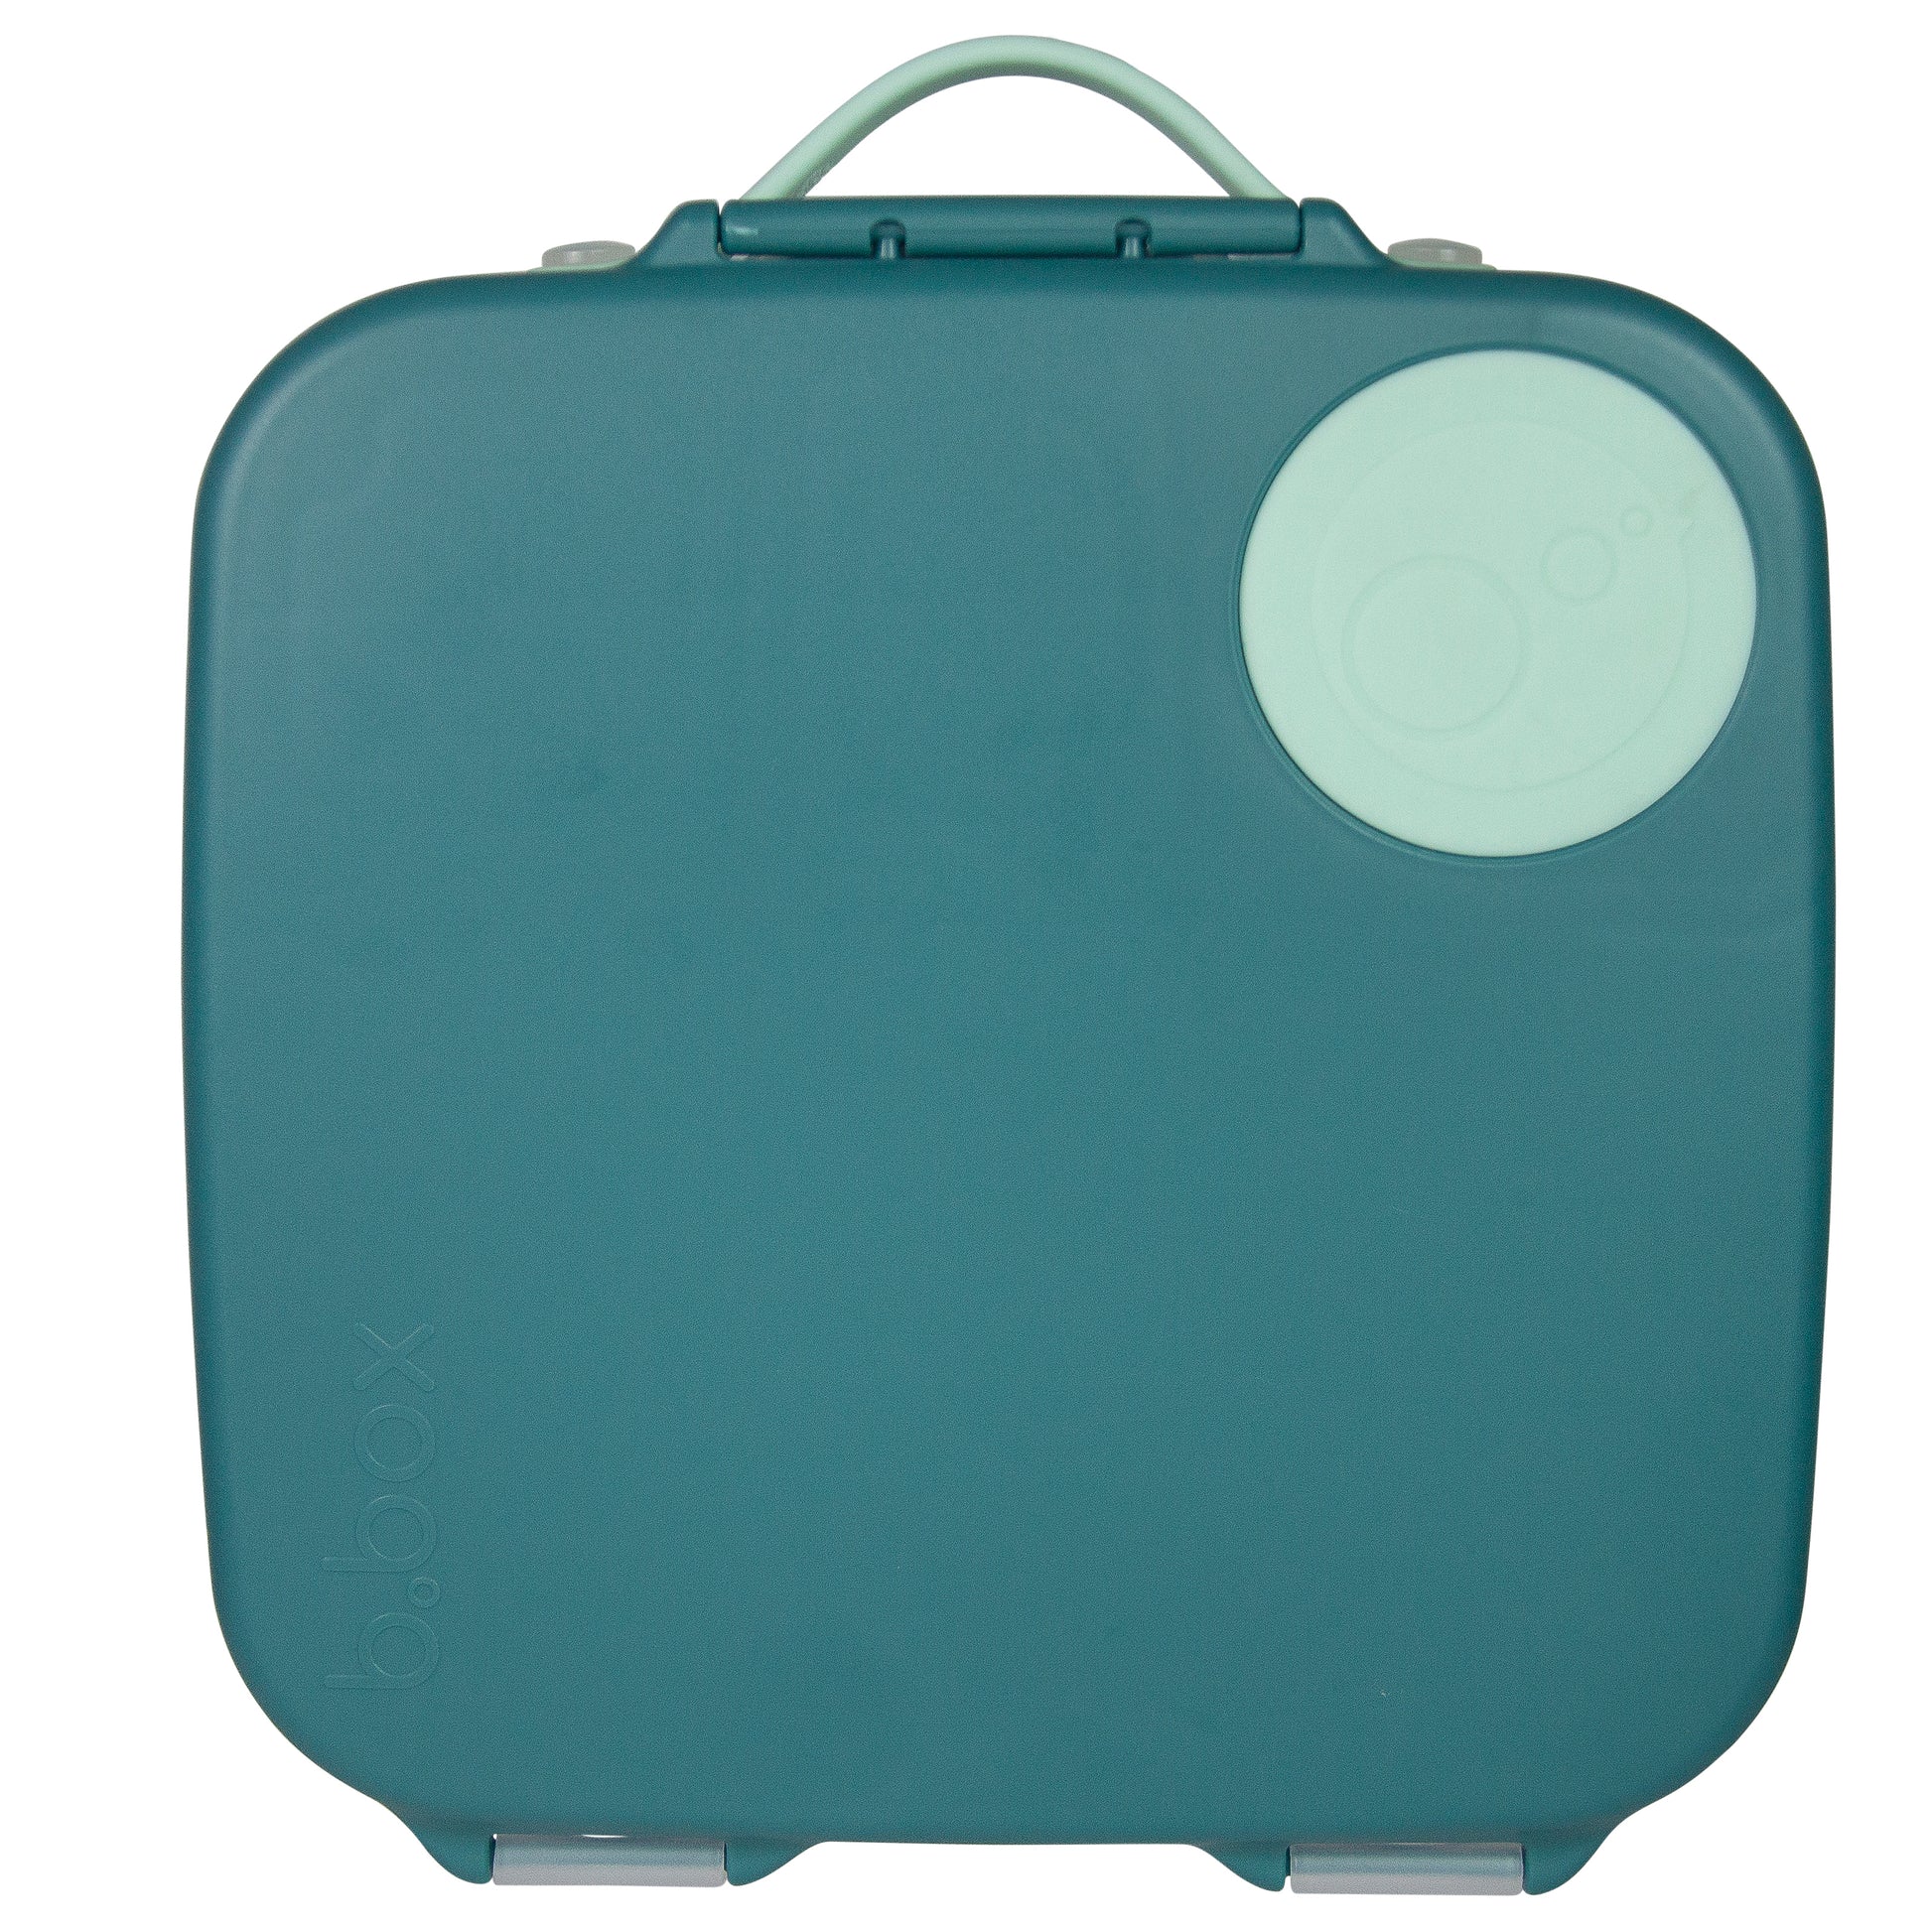 b.box Kids Reusable Lunchbox in Emerald Forest available at Bear & Moo